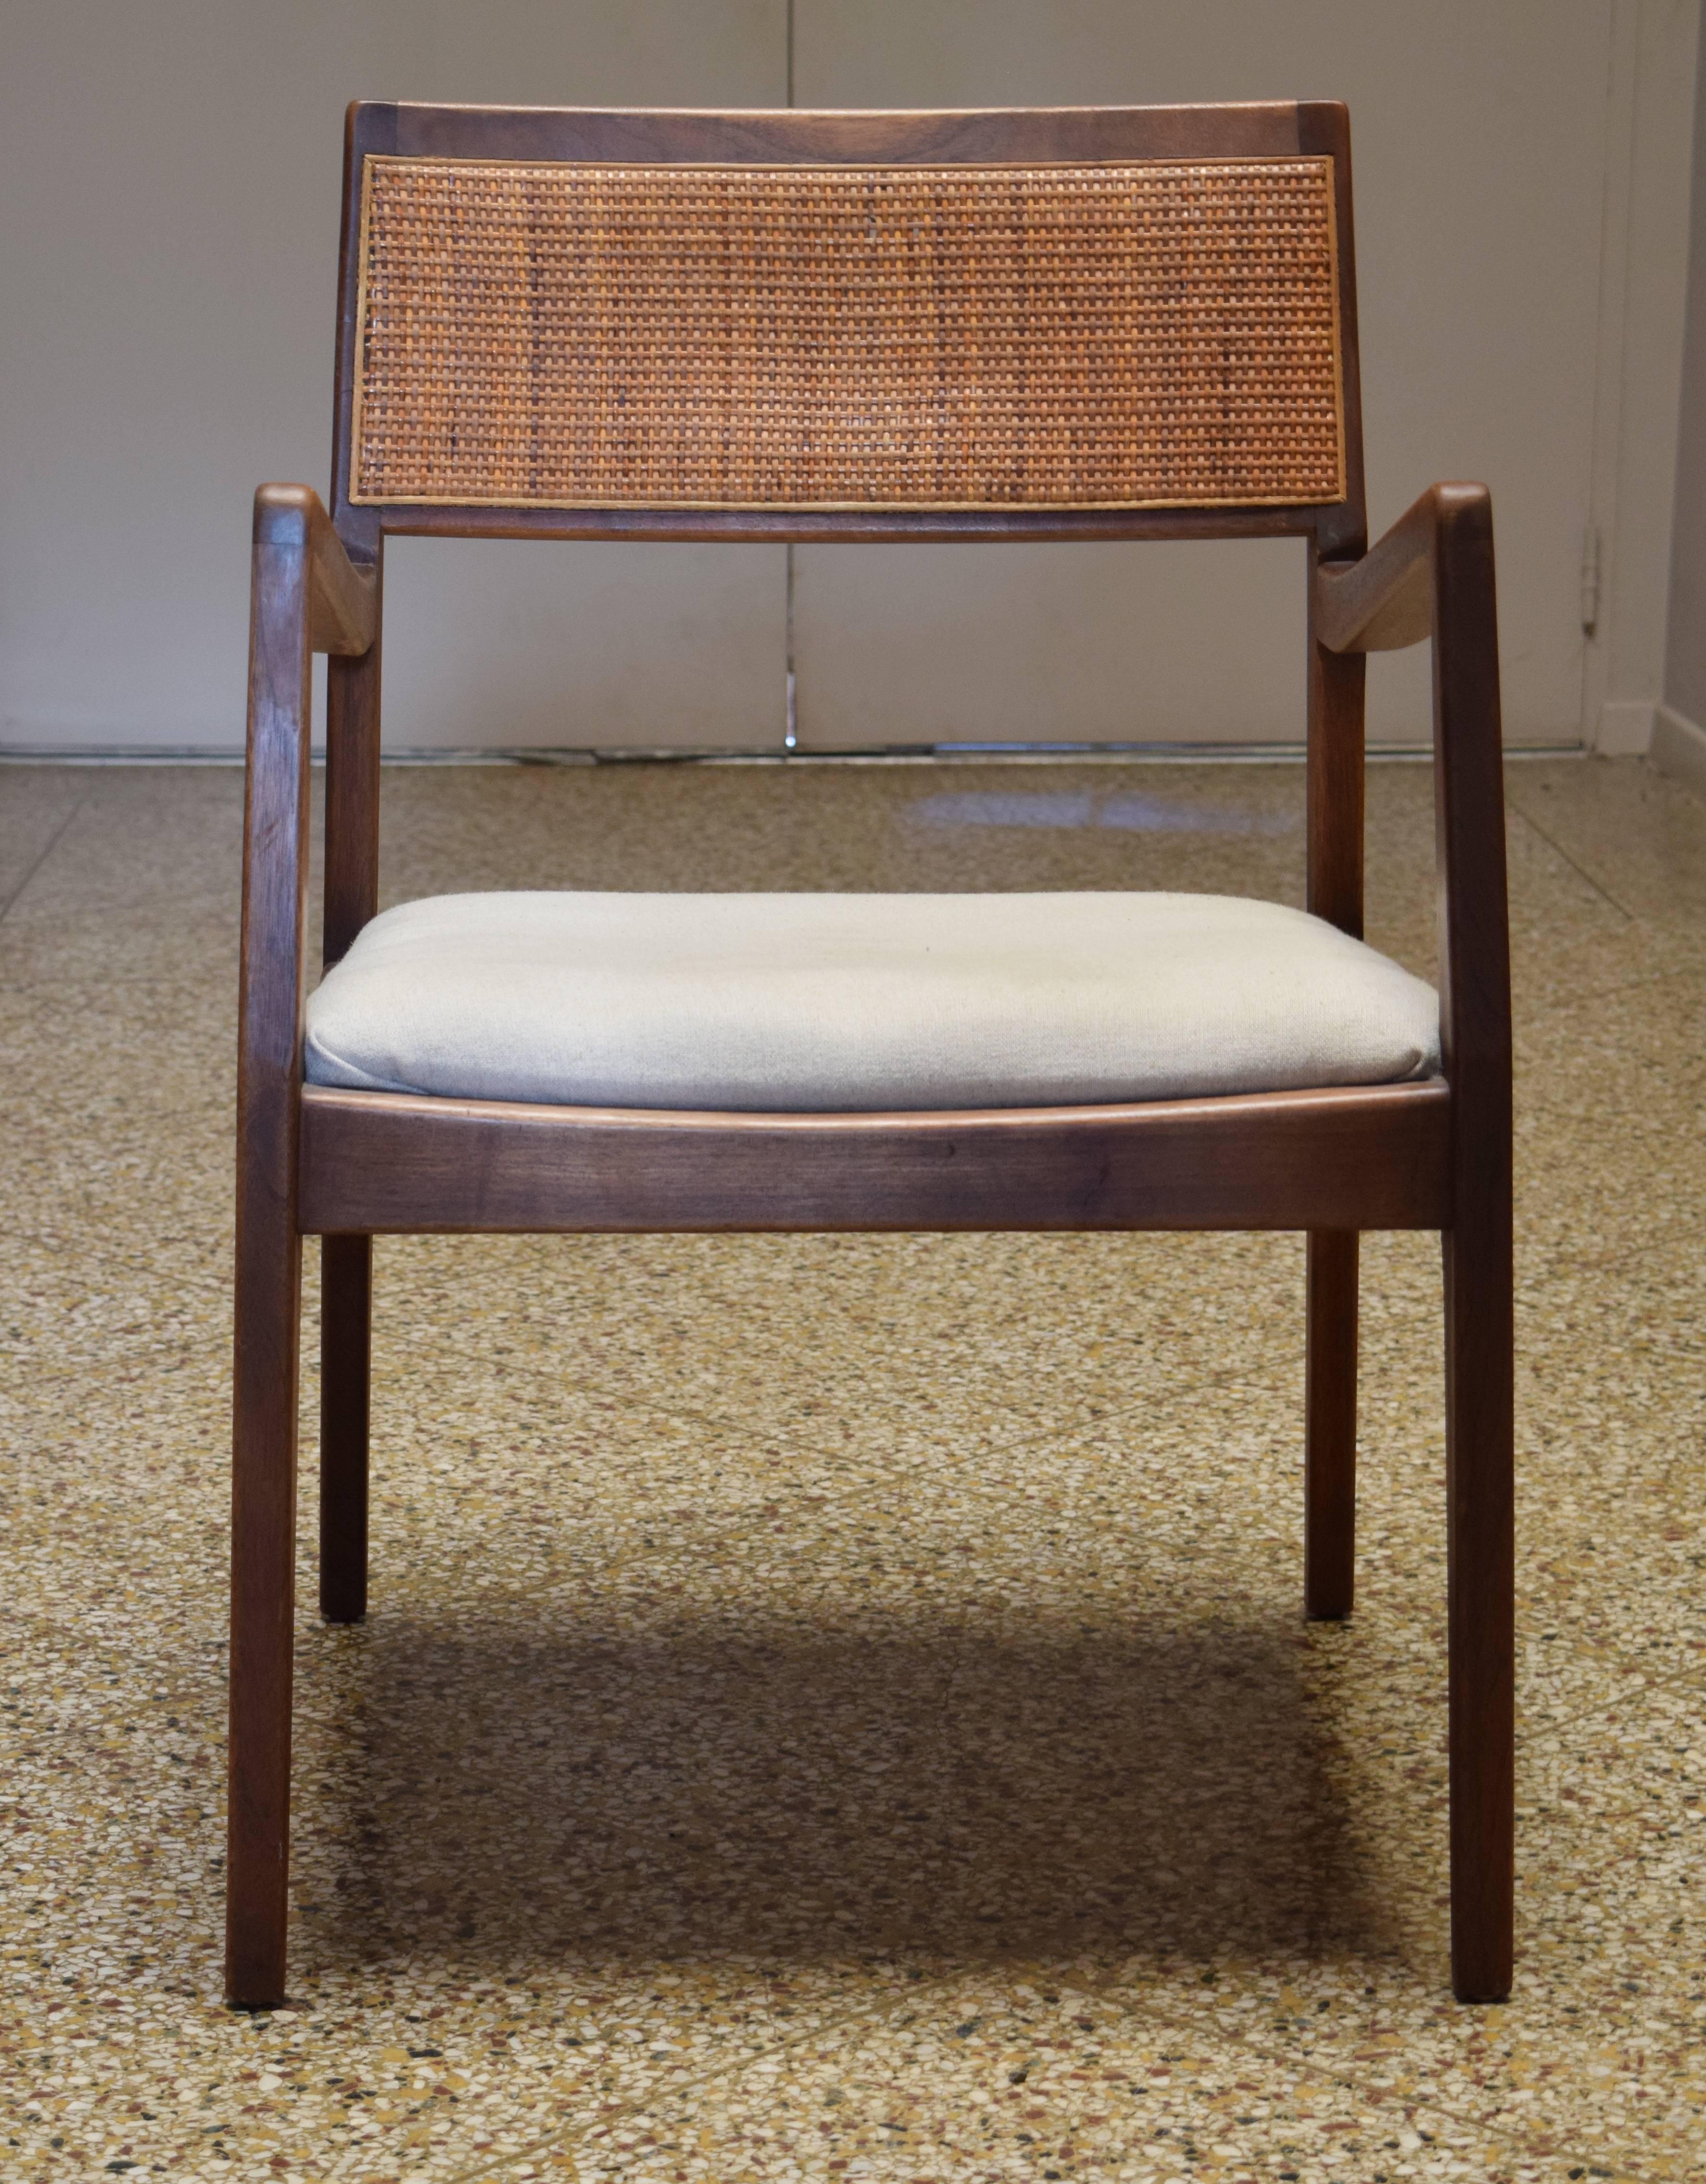 Sculpted walnut armchair with caned backrest by Jens Risom.